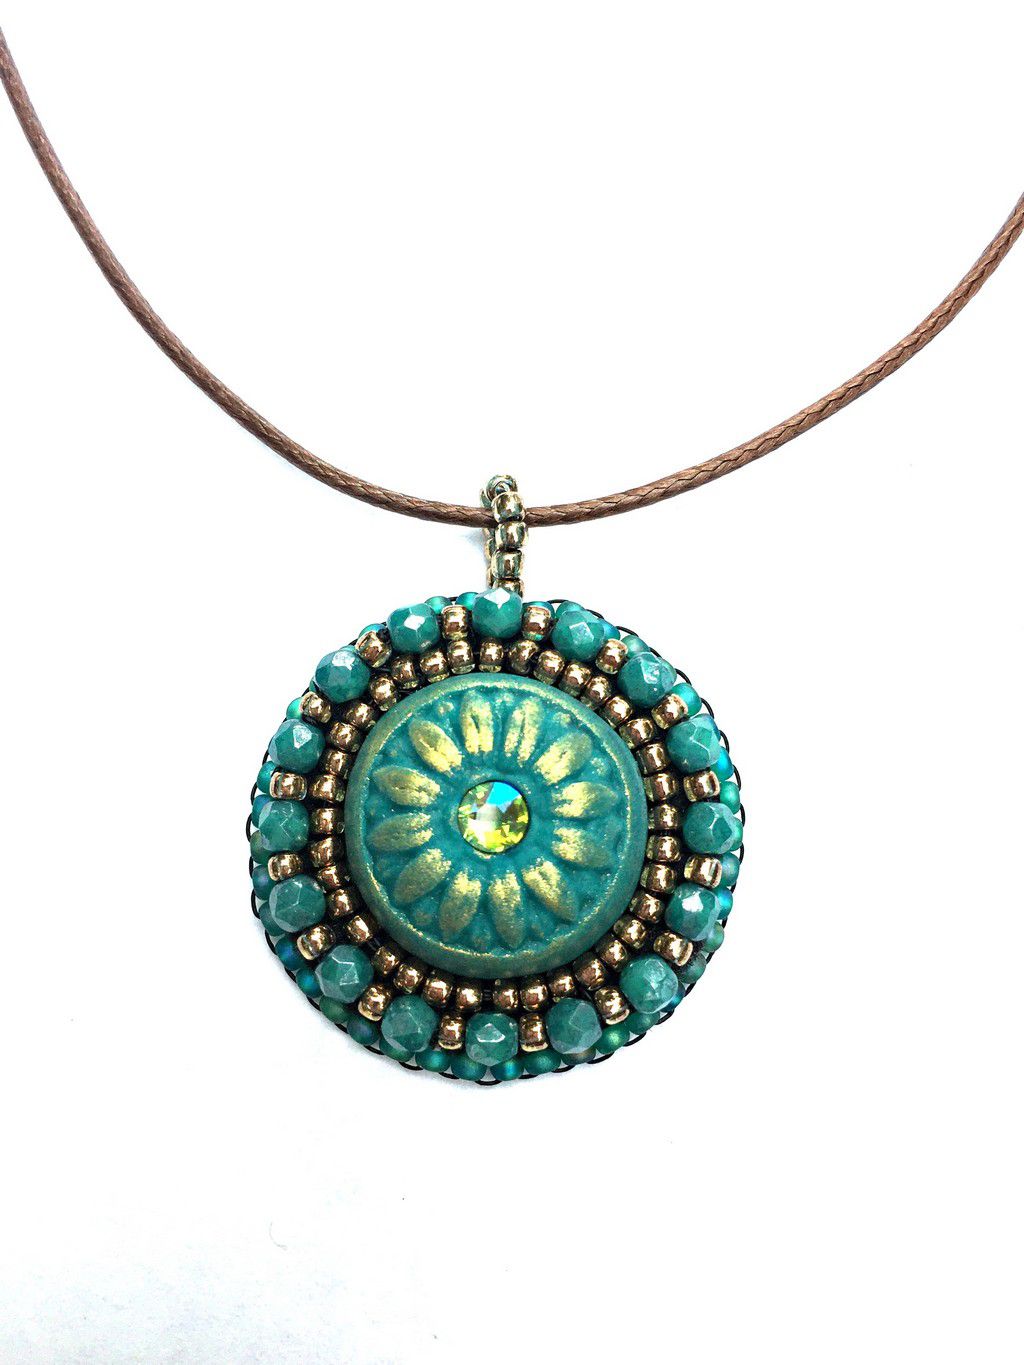 Tidy green and gold daisy pendant with crystal center stone